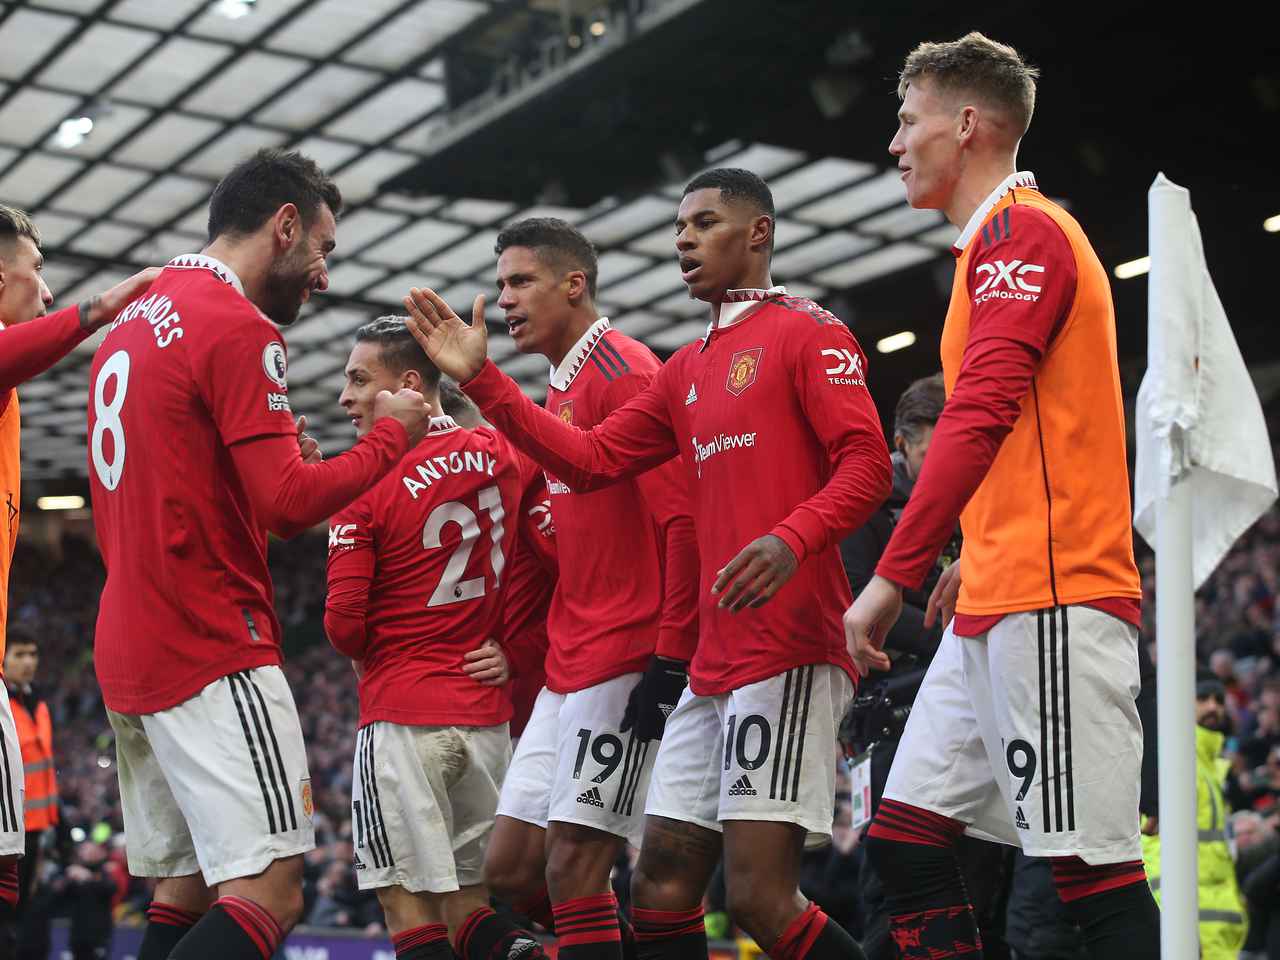 Manchester United: Five reasons behind its remarkable resurgence